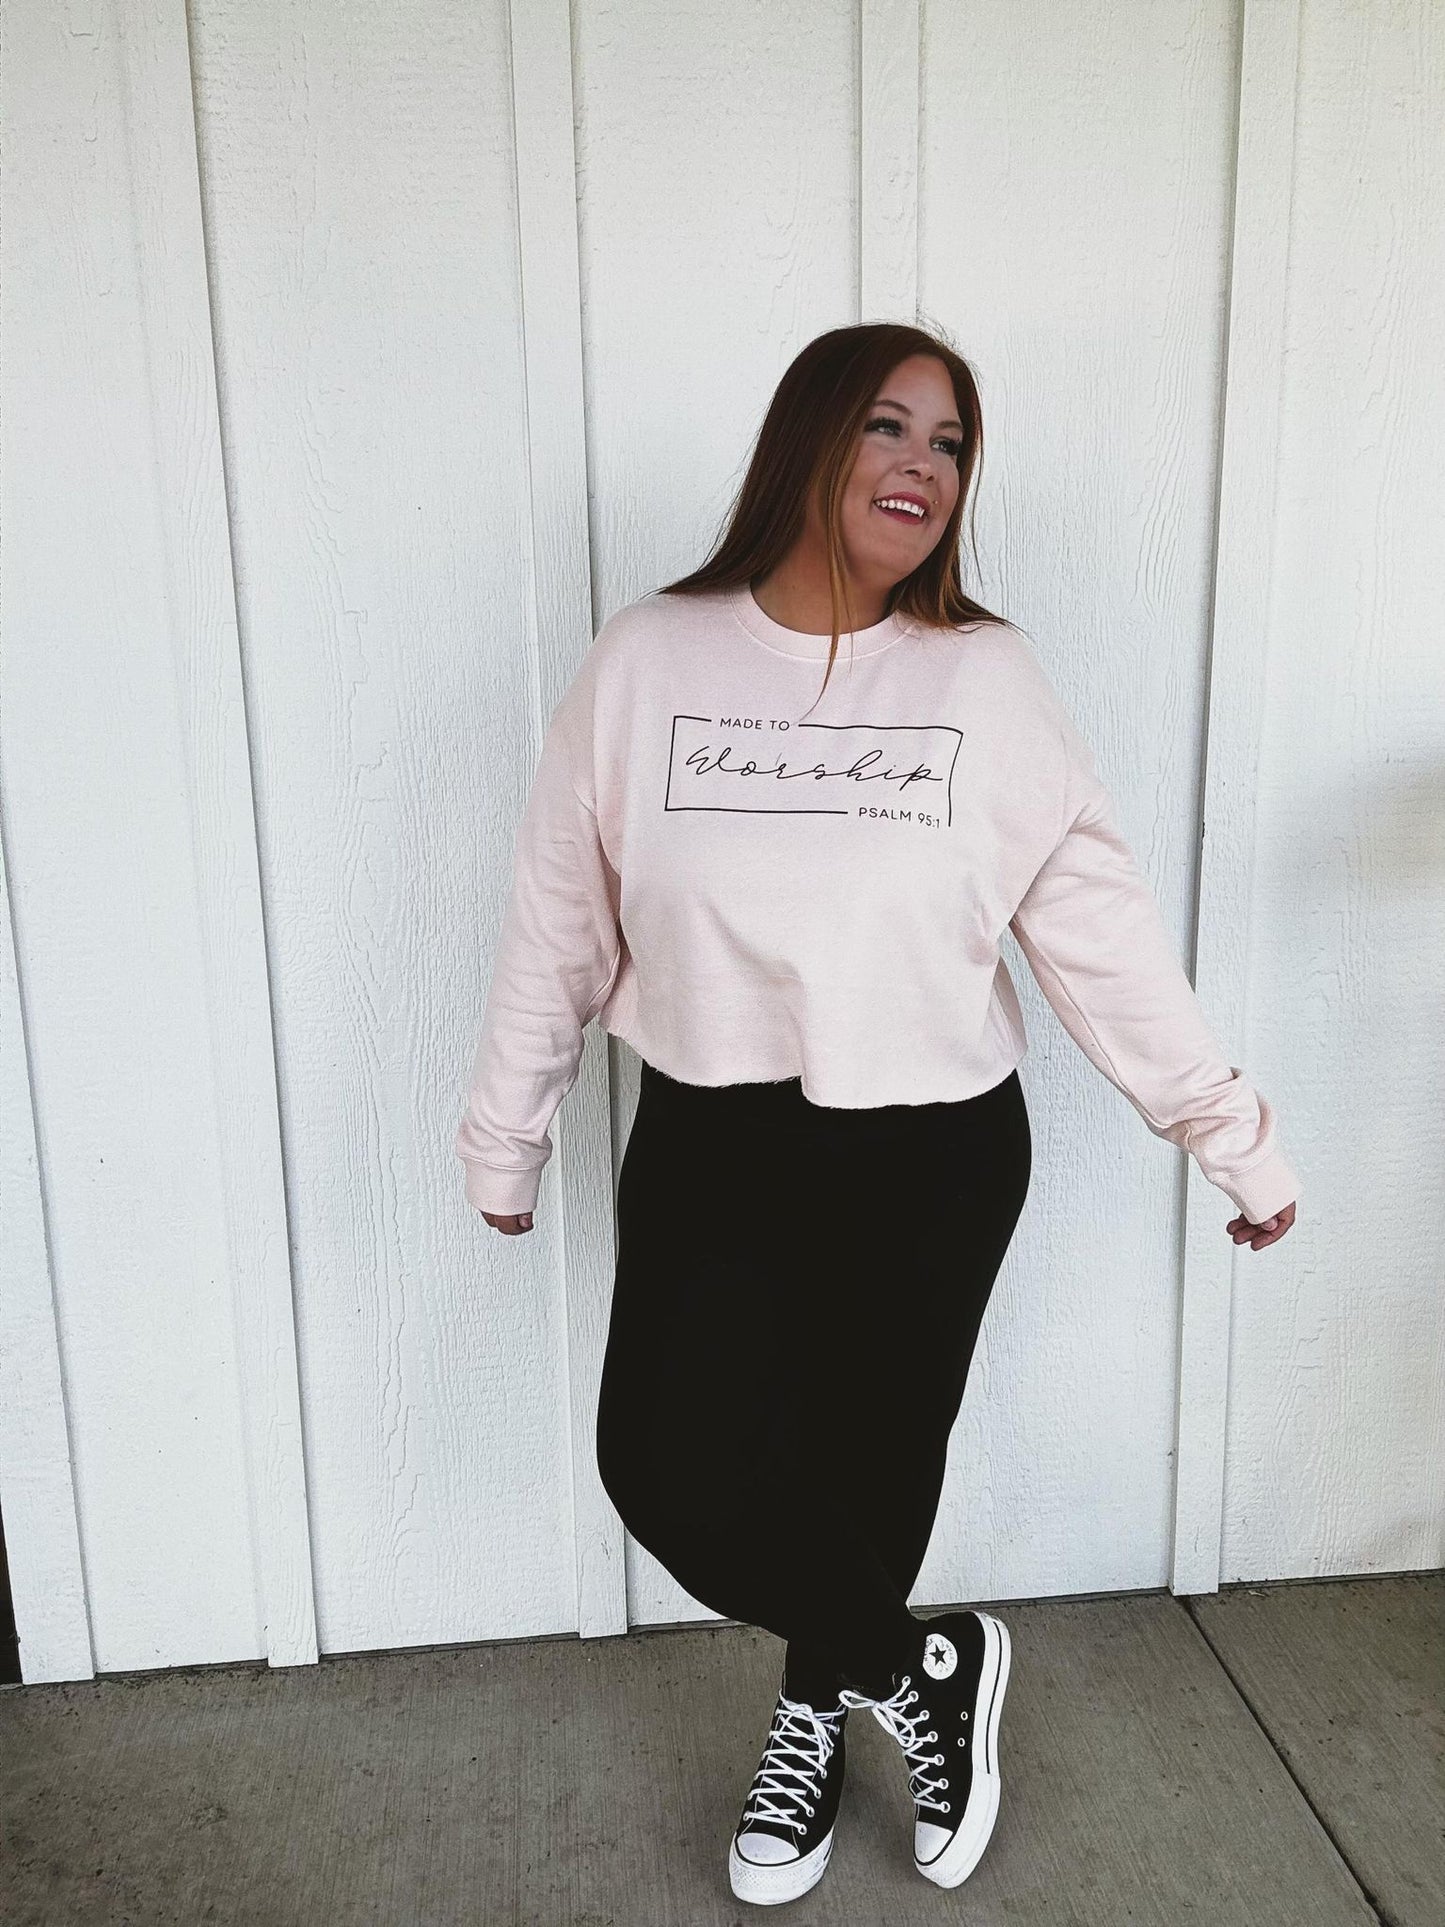 Made to Worship Lightweight Cropped Crewneck in Pink